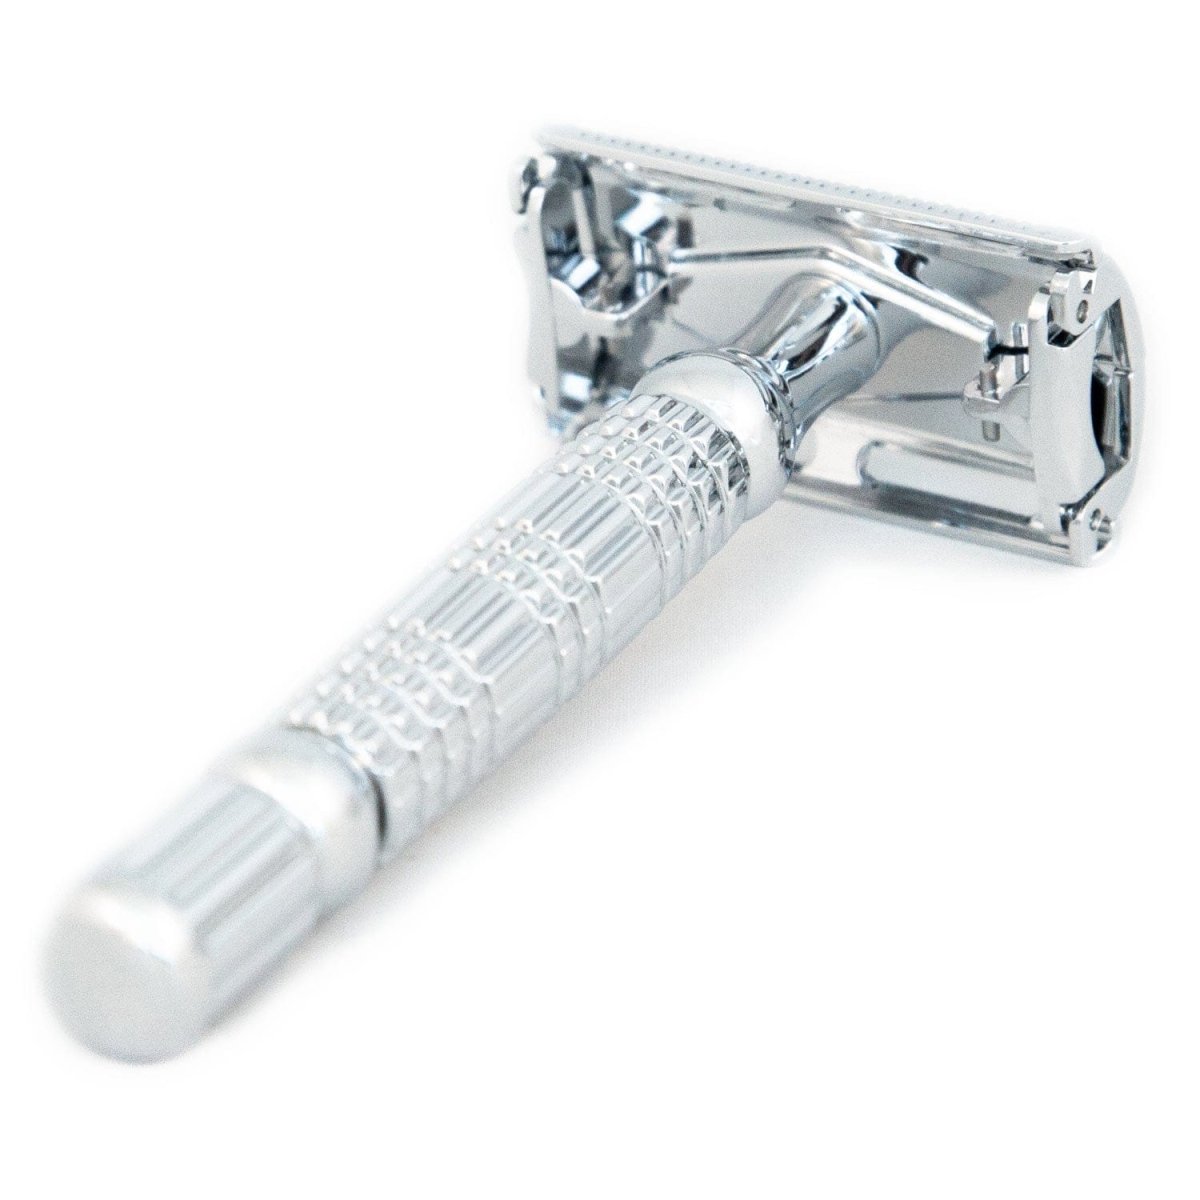 Hill & Drew HDRB40 Double Edge Butterfly Razor and Case - Shaving Time